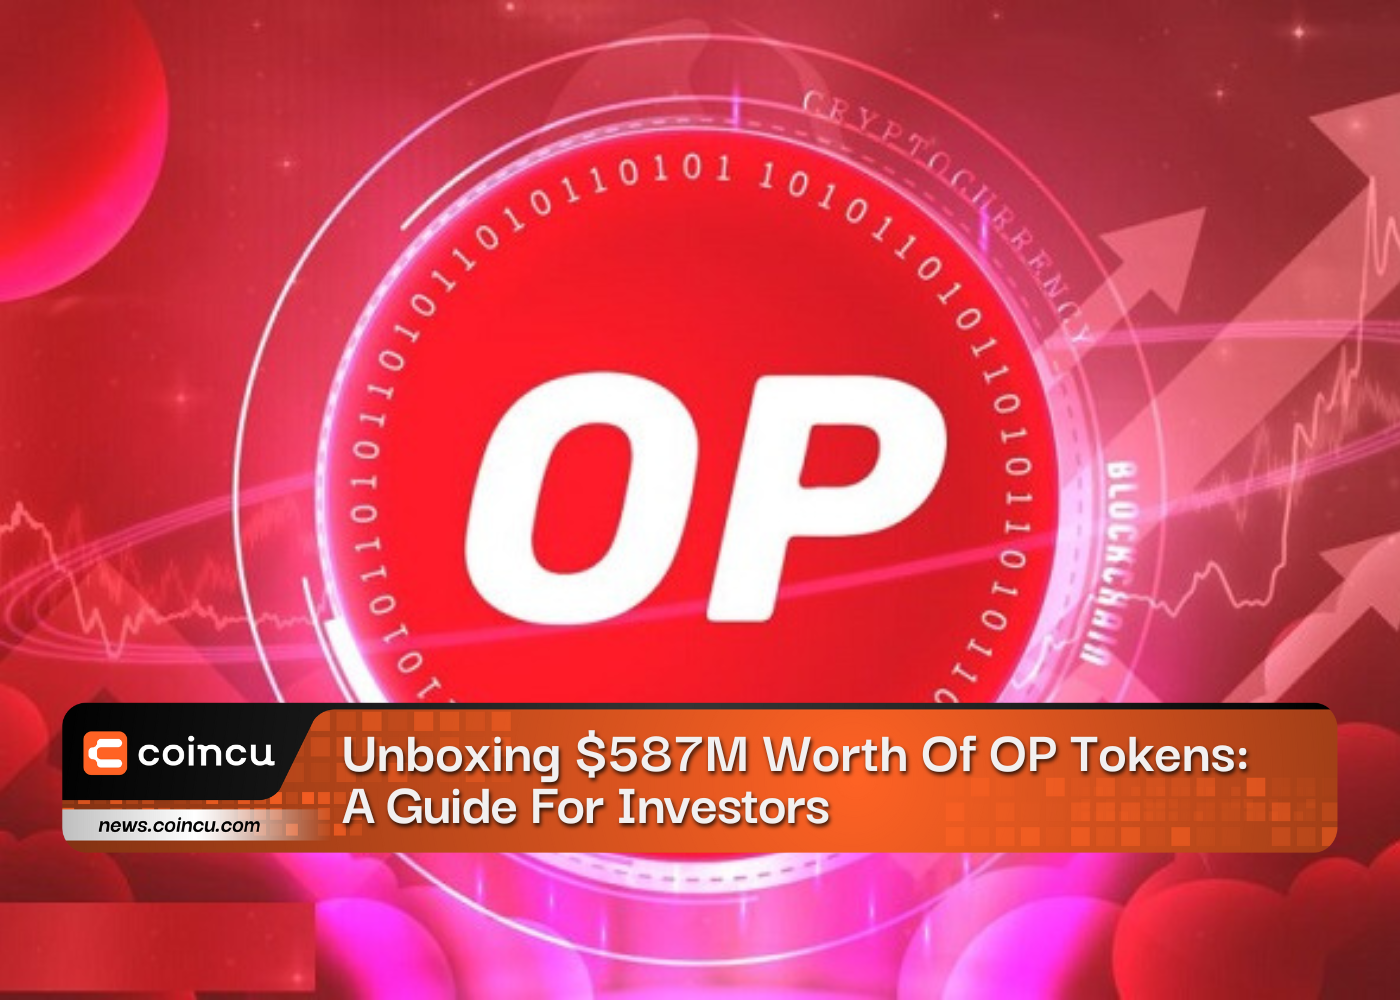 Unboxing 587M Worth Of OP Tokens